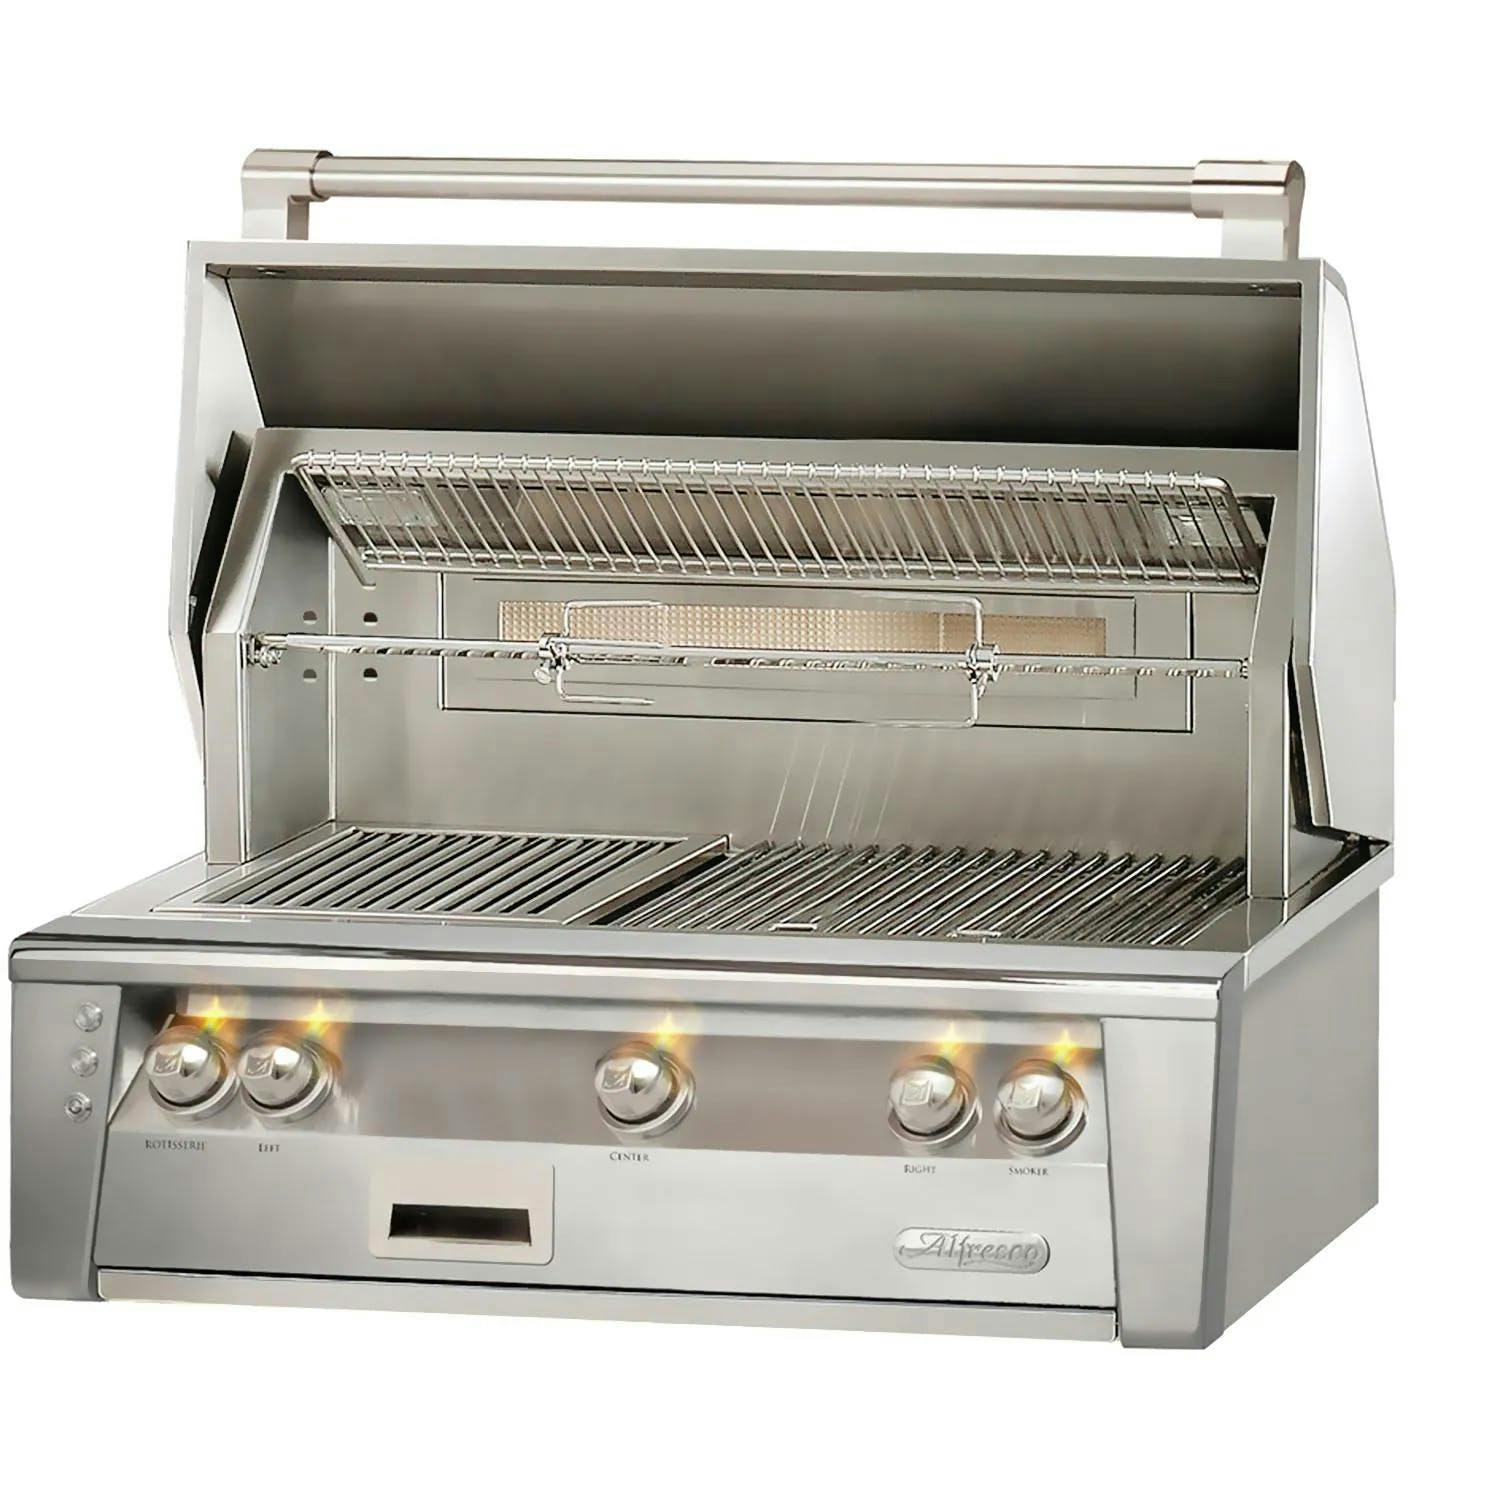 Alfresco ALXE Built-in Gas Grill with Rotisserie